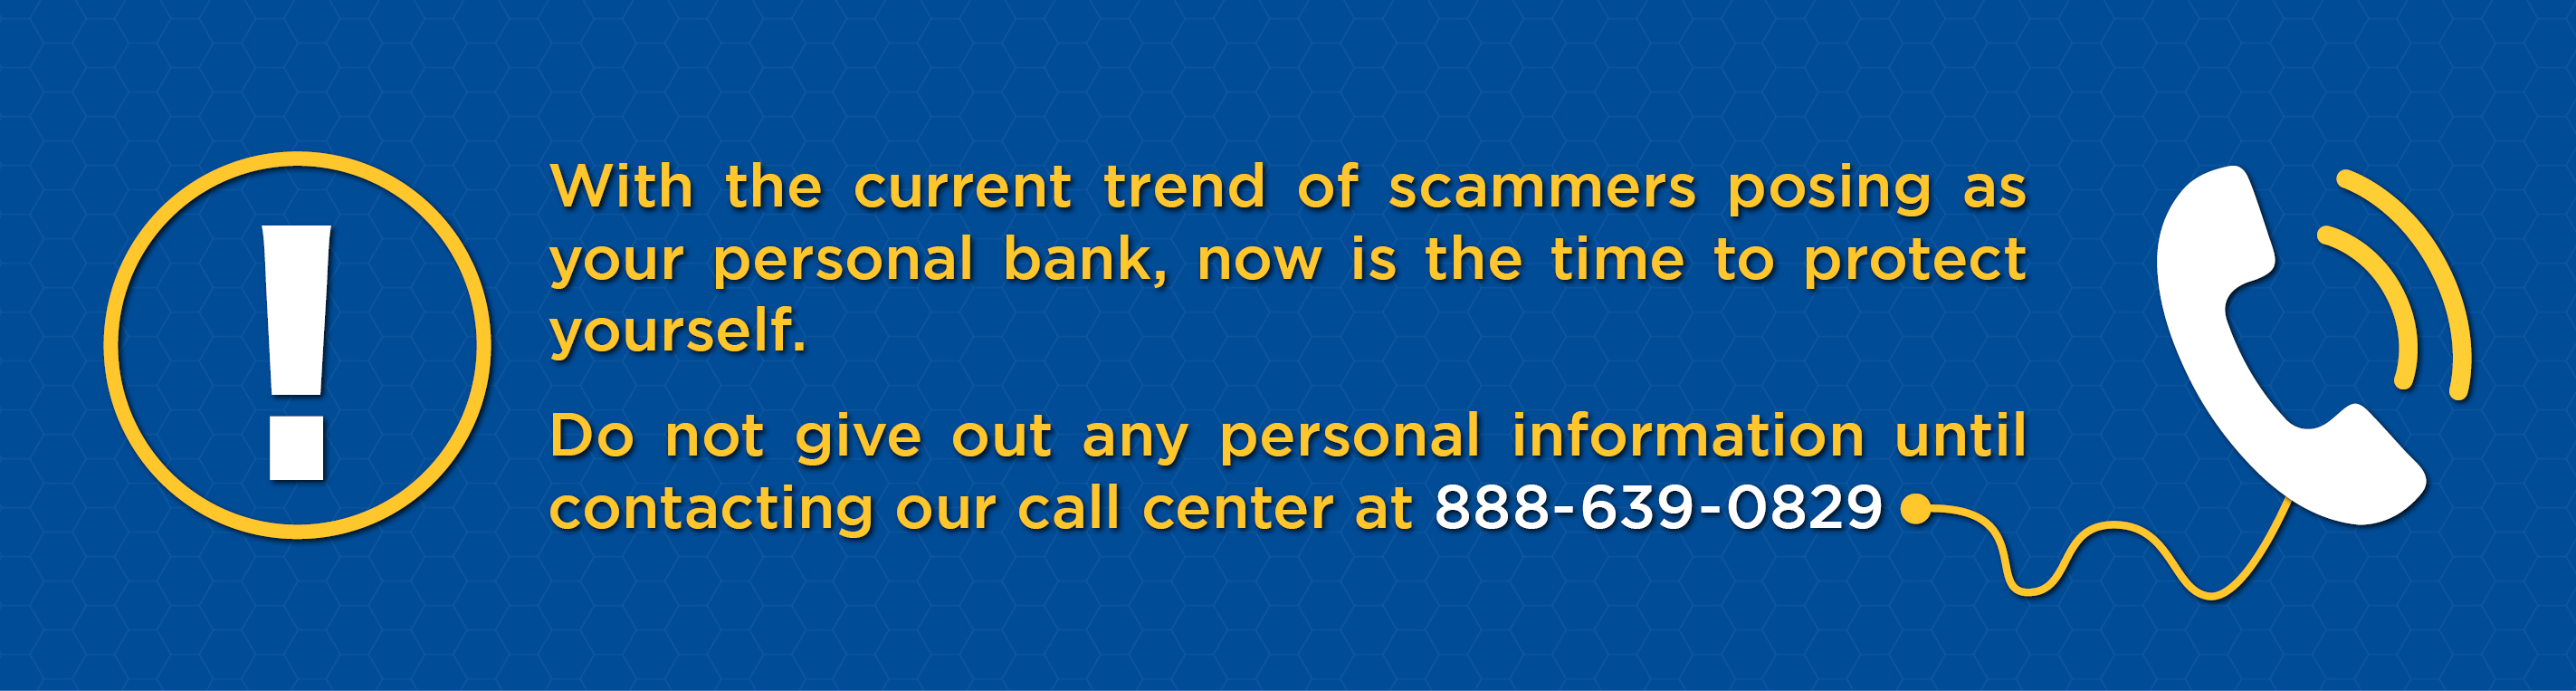 With the current trend of scammers posing as your personal bank, now is the time to protect yourself. Do not give out any personal information until contacting our call center at 888-639-0829